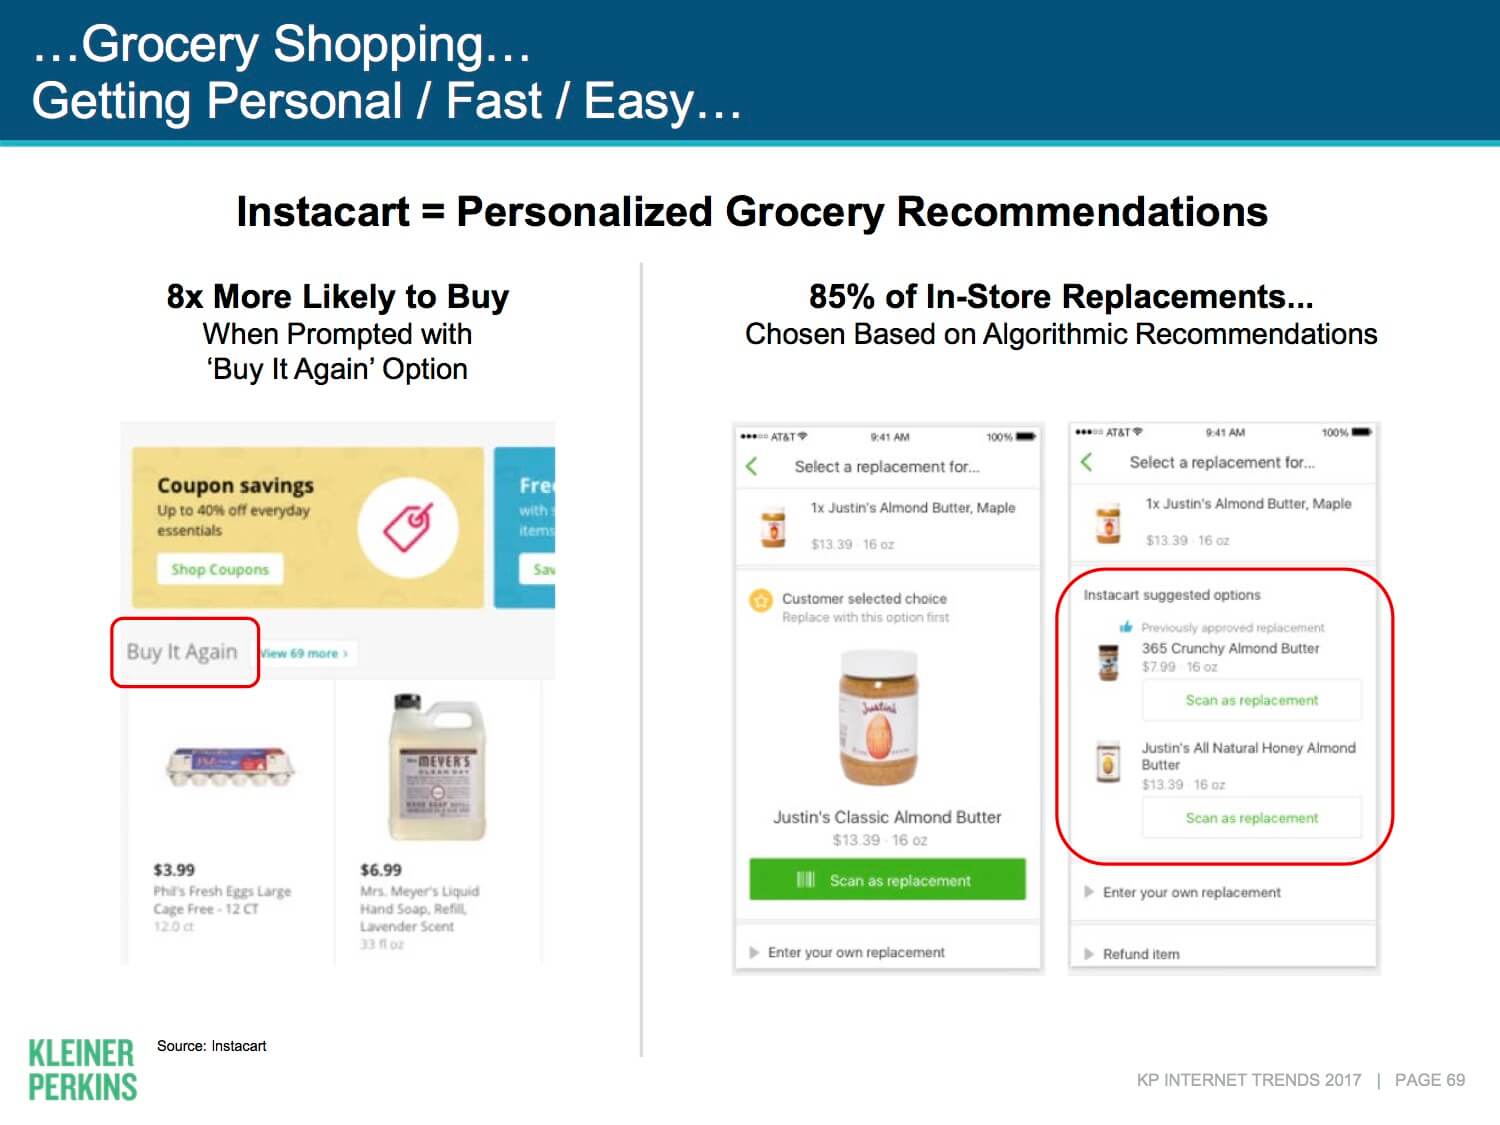 Ecommerce Trends 2017: Grocery shopping online is getting personal, fast, and easy